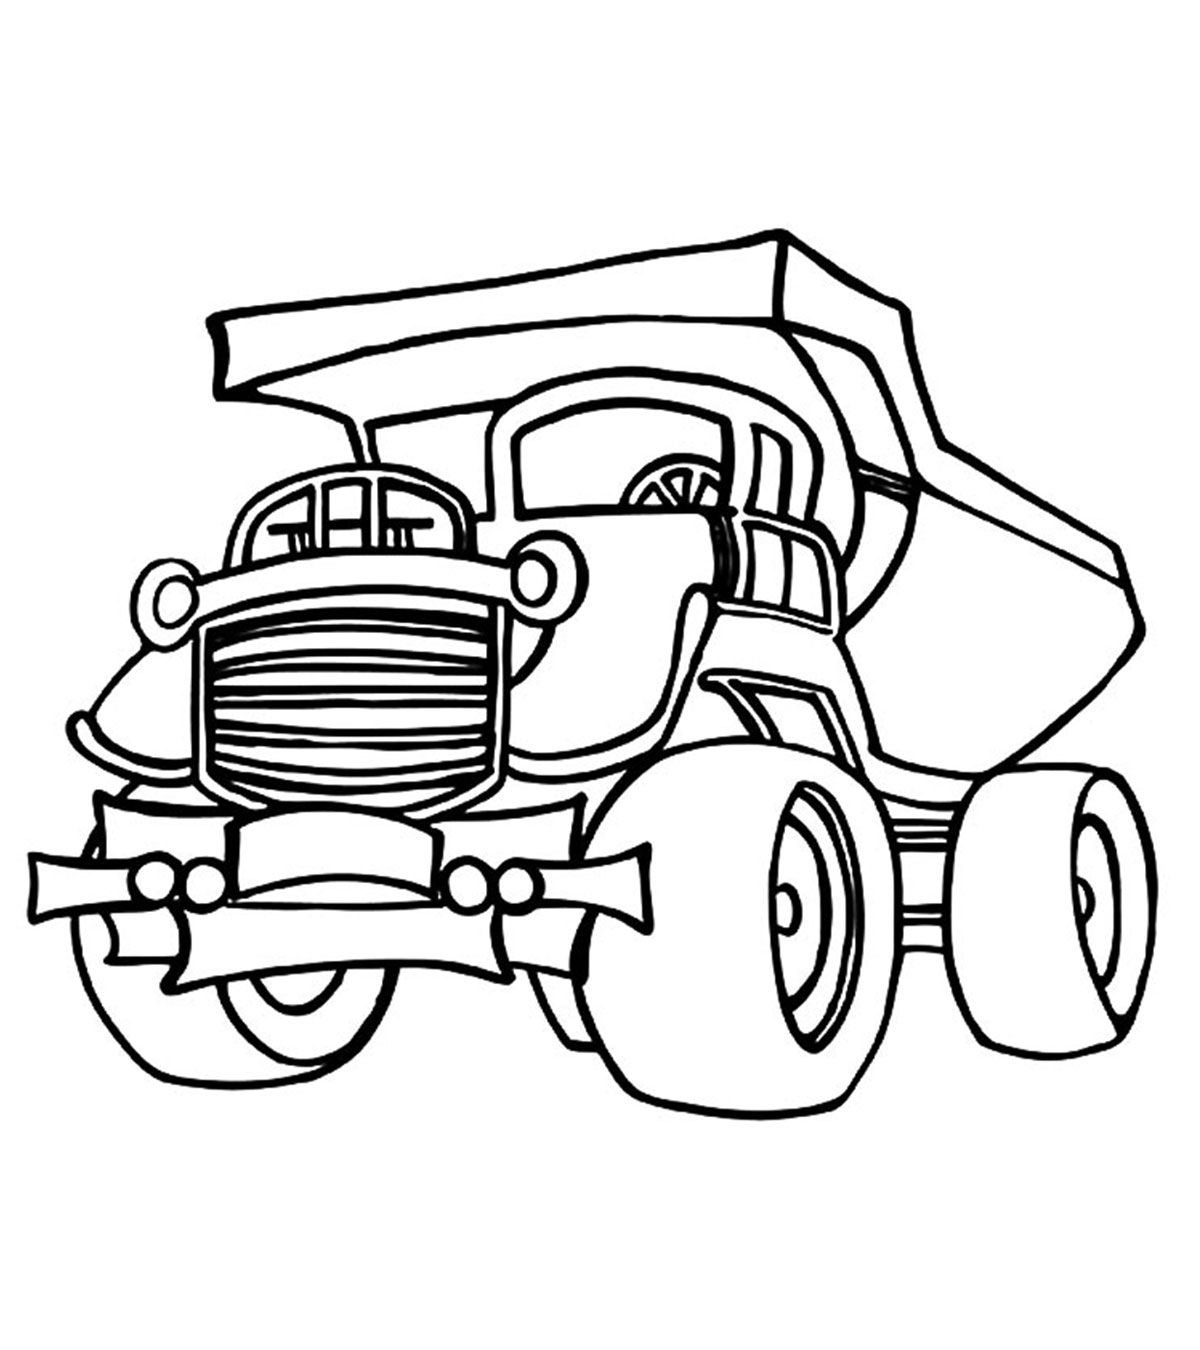 Truck Coloring Pages For Preschoolers Top 10 Free Printable Dump Truck Coloring Pages Online